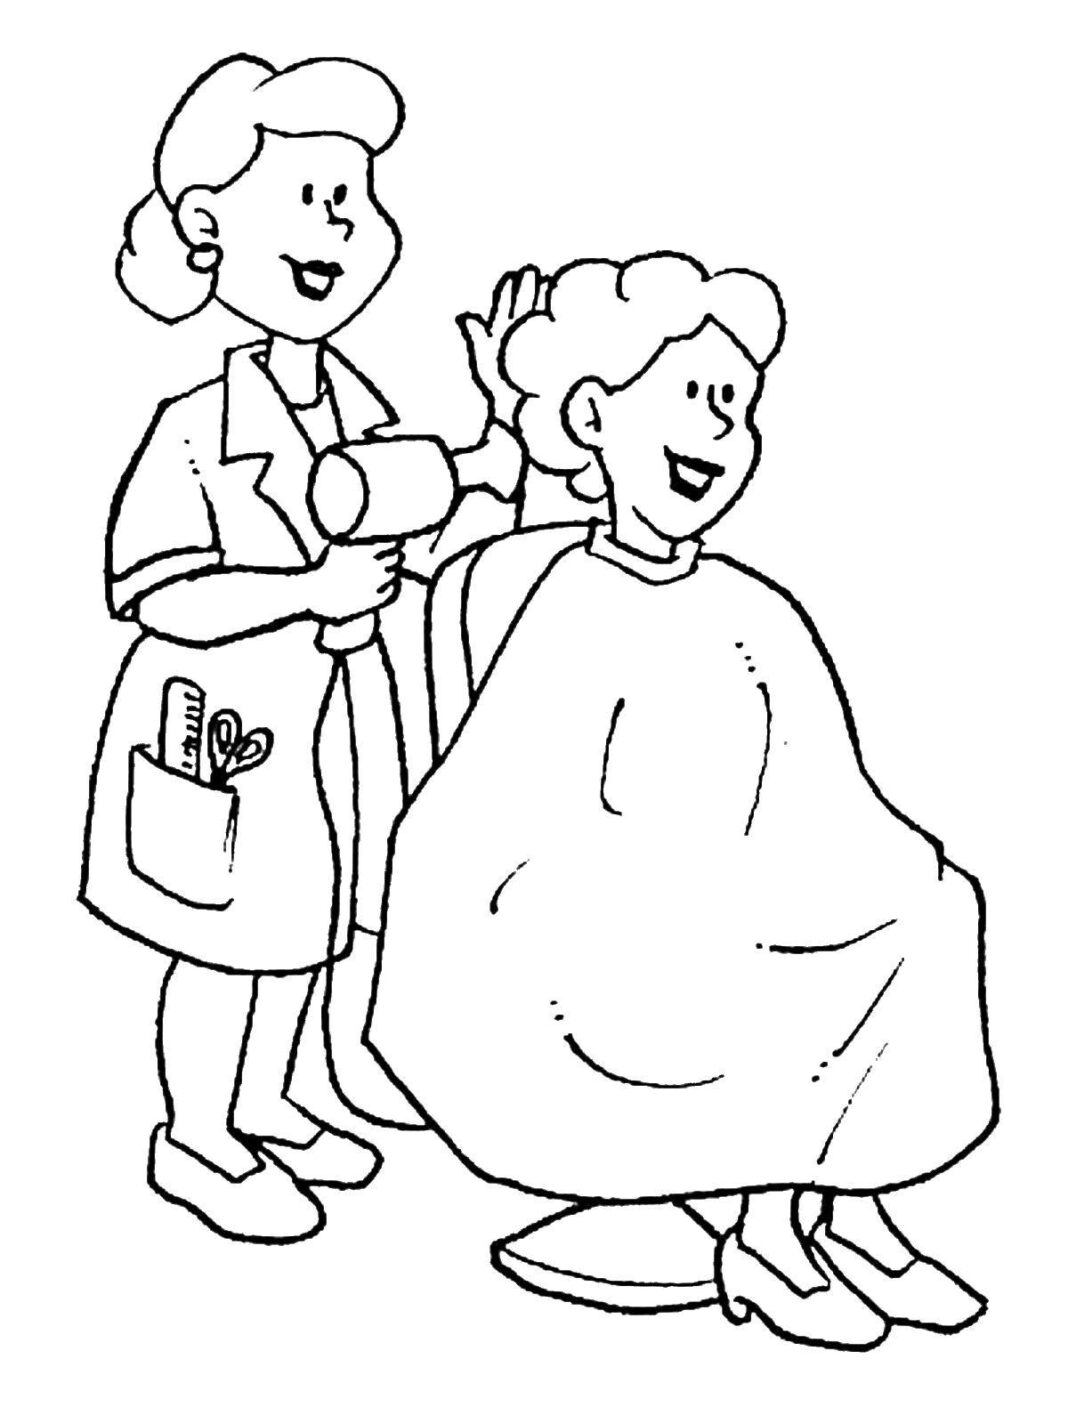 Hairdresser Salon Coloring Page